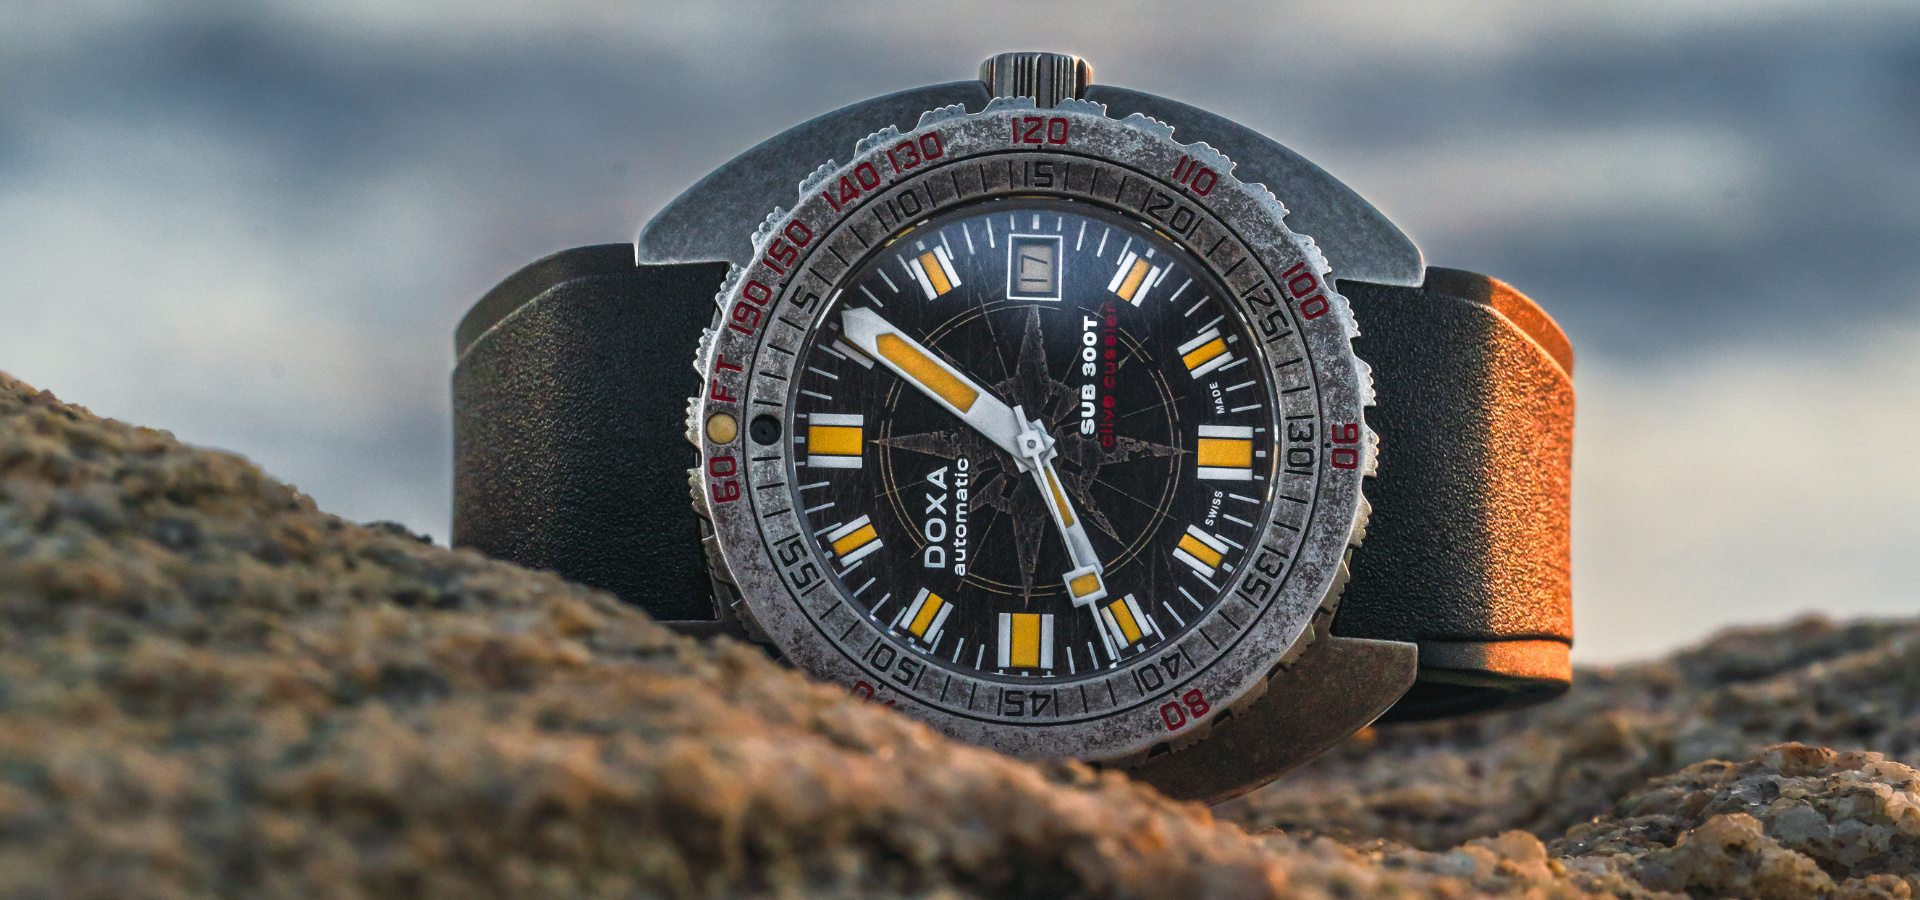 Celebrating Exploration and Legacy with The DOXA SUB 300T Sharkhunter Clive Cussler